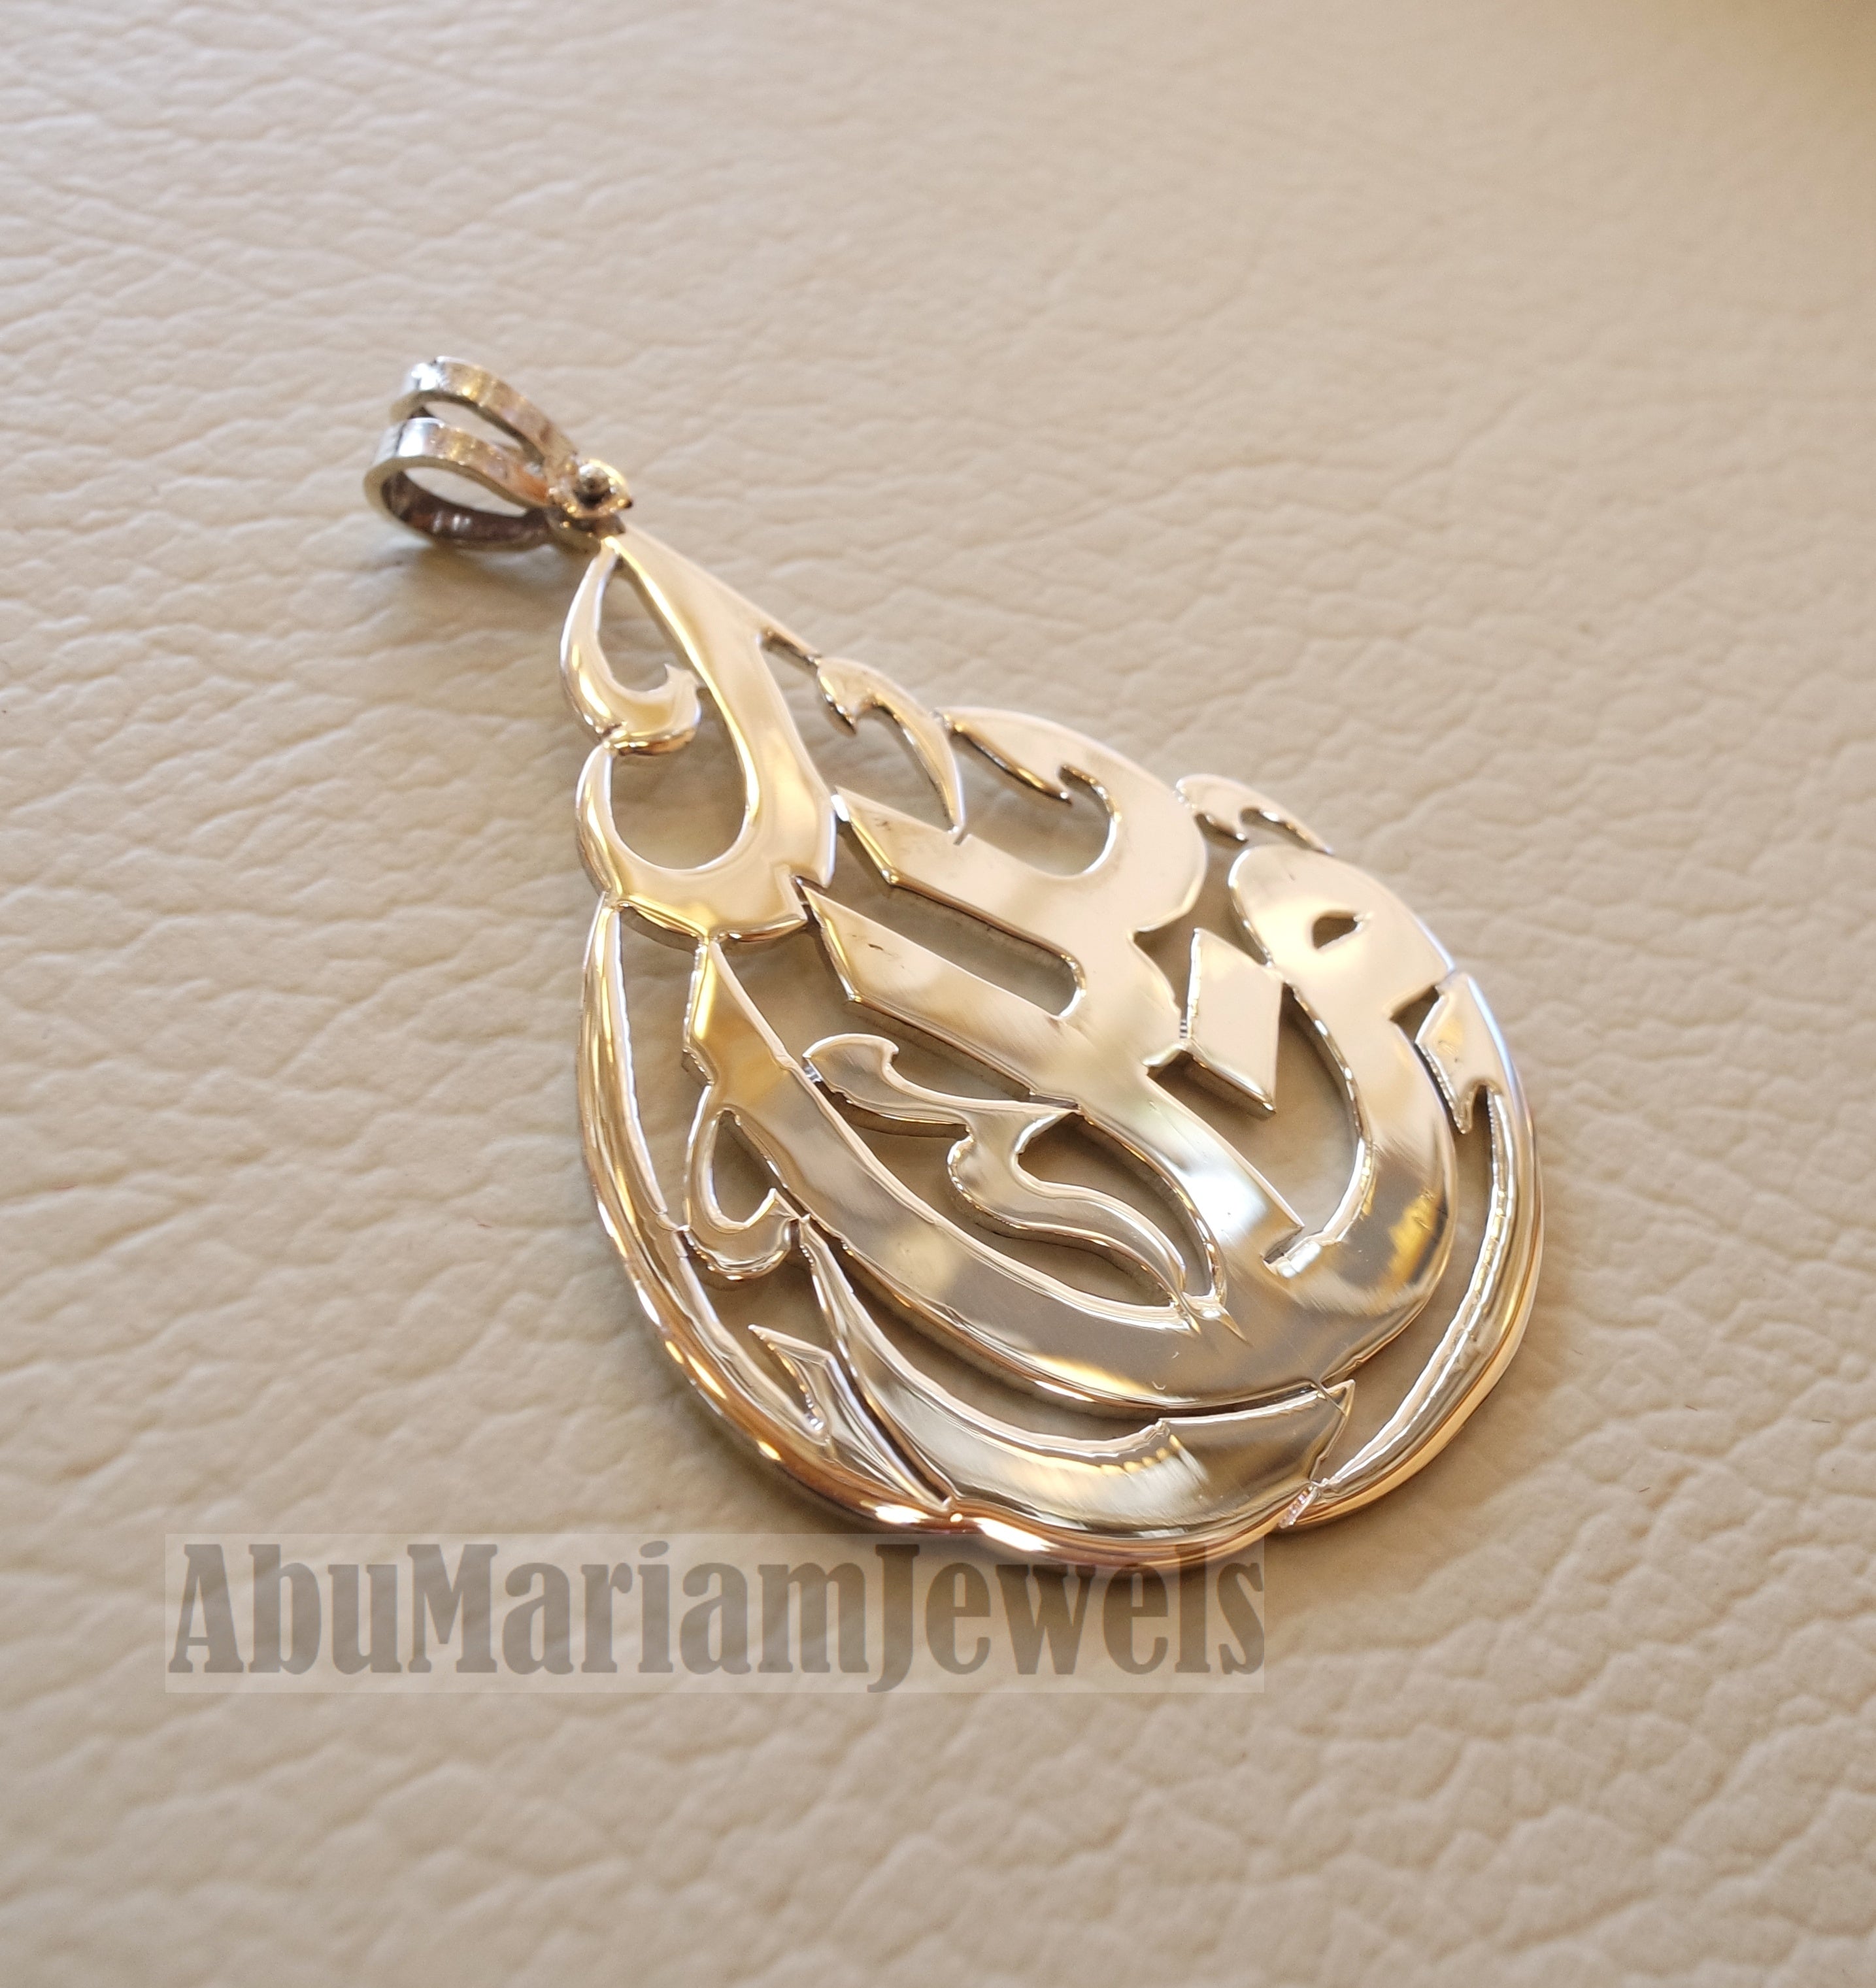 pendant any one or two names arabic made to order customized polish sterling silver 925 big pear shape other can be applied اسماء عربي